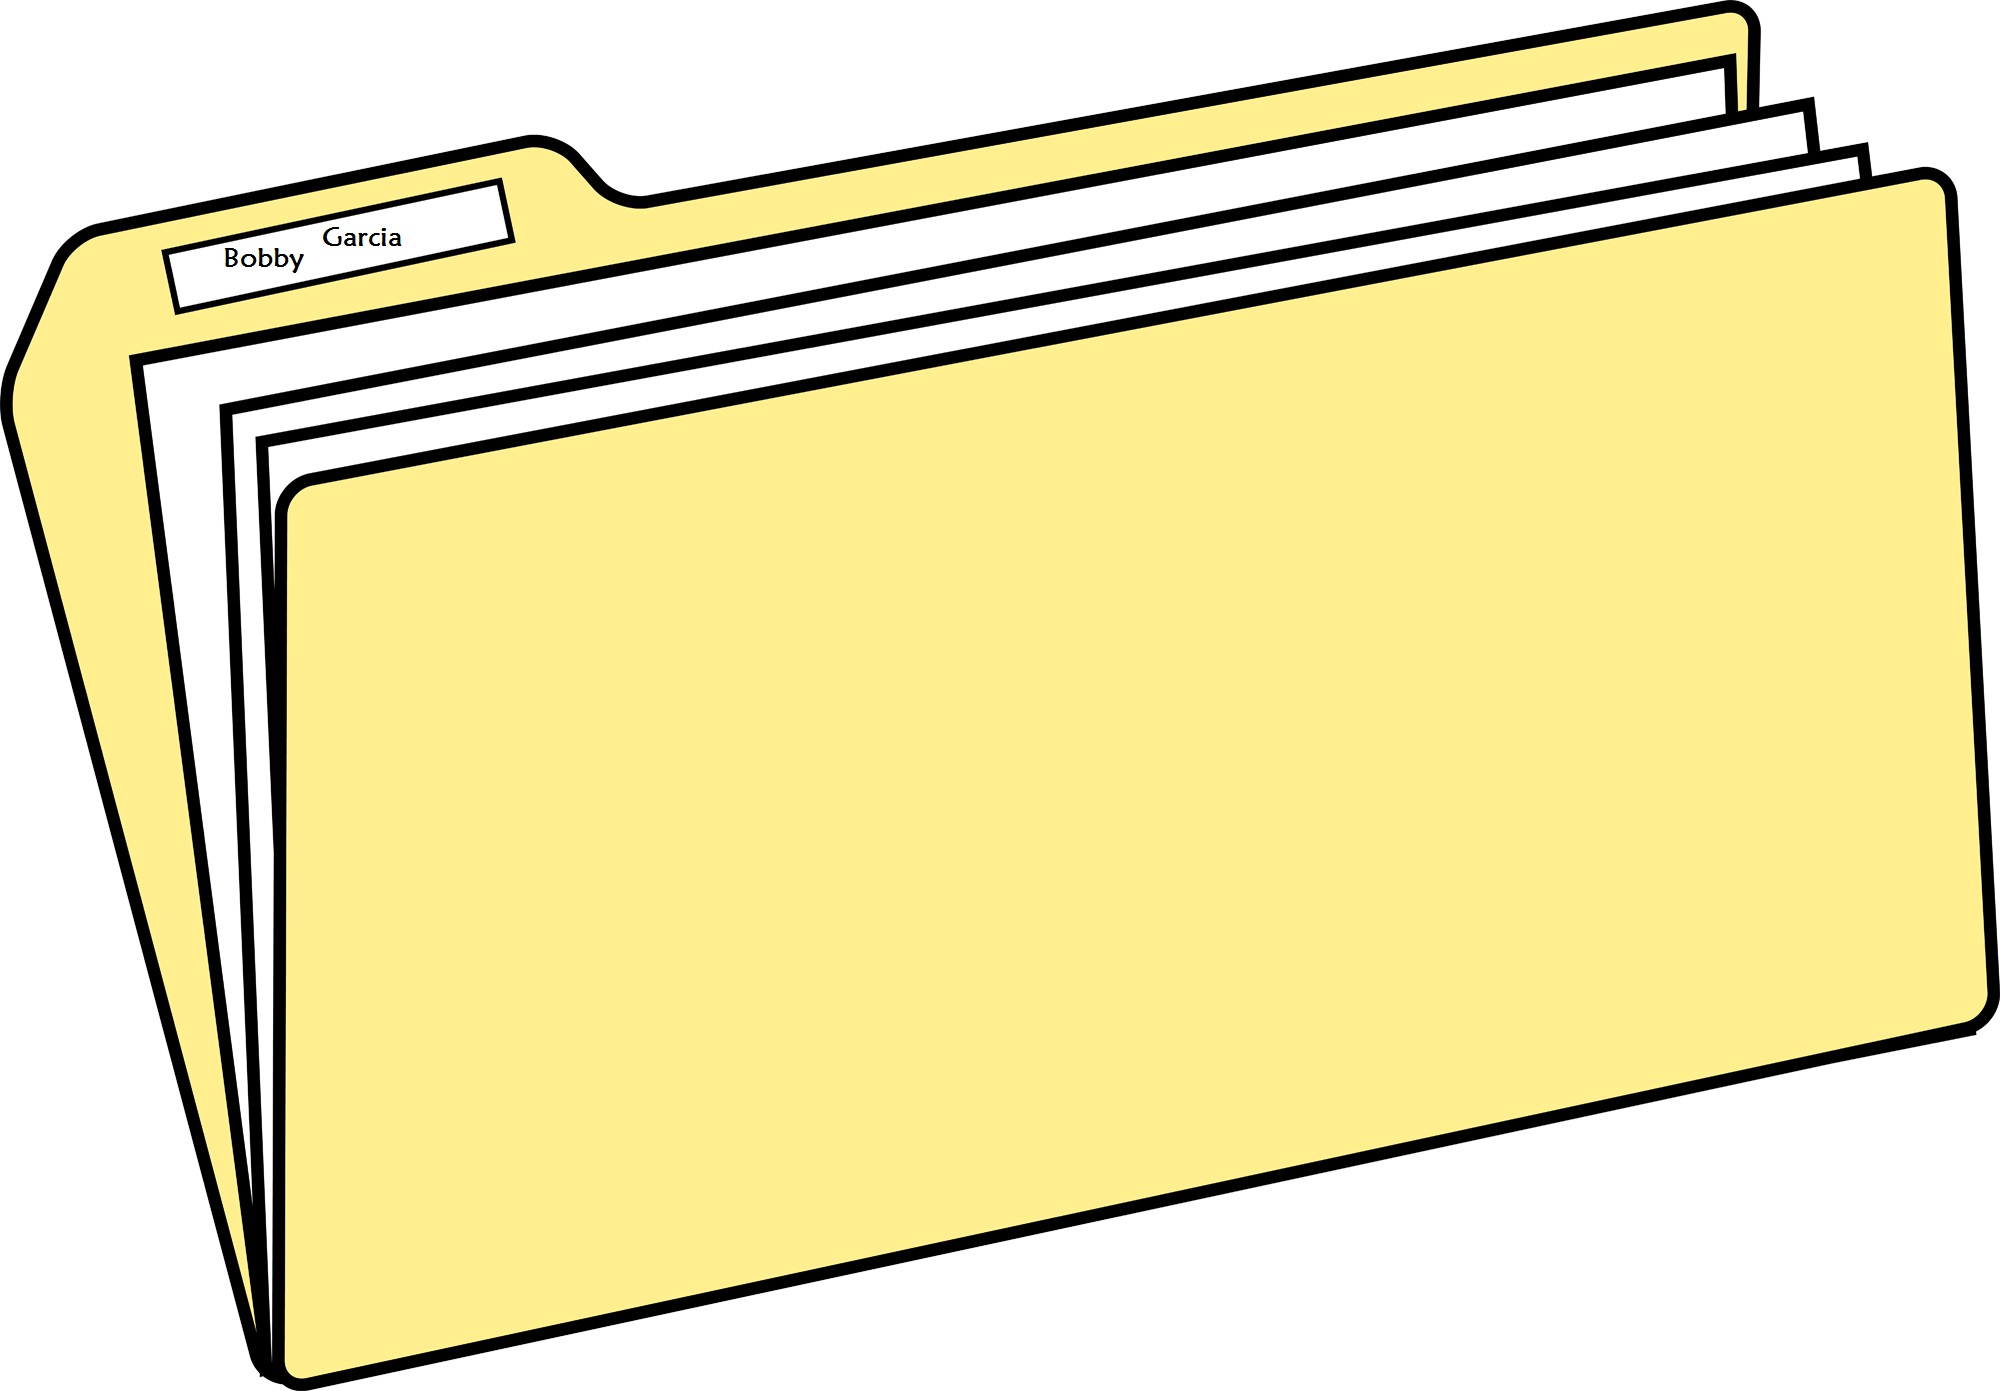 Pictures Of Clipboards - ClipArt Best